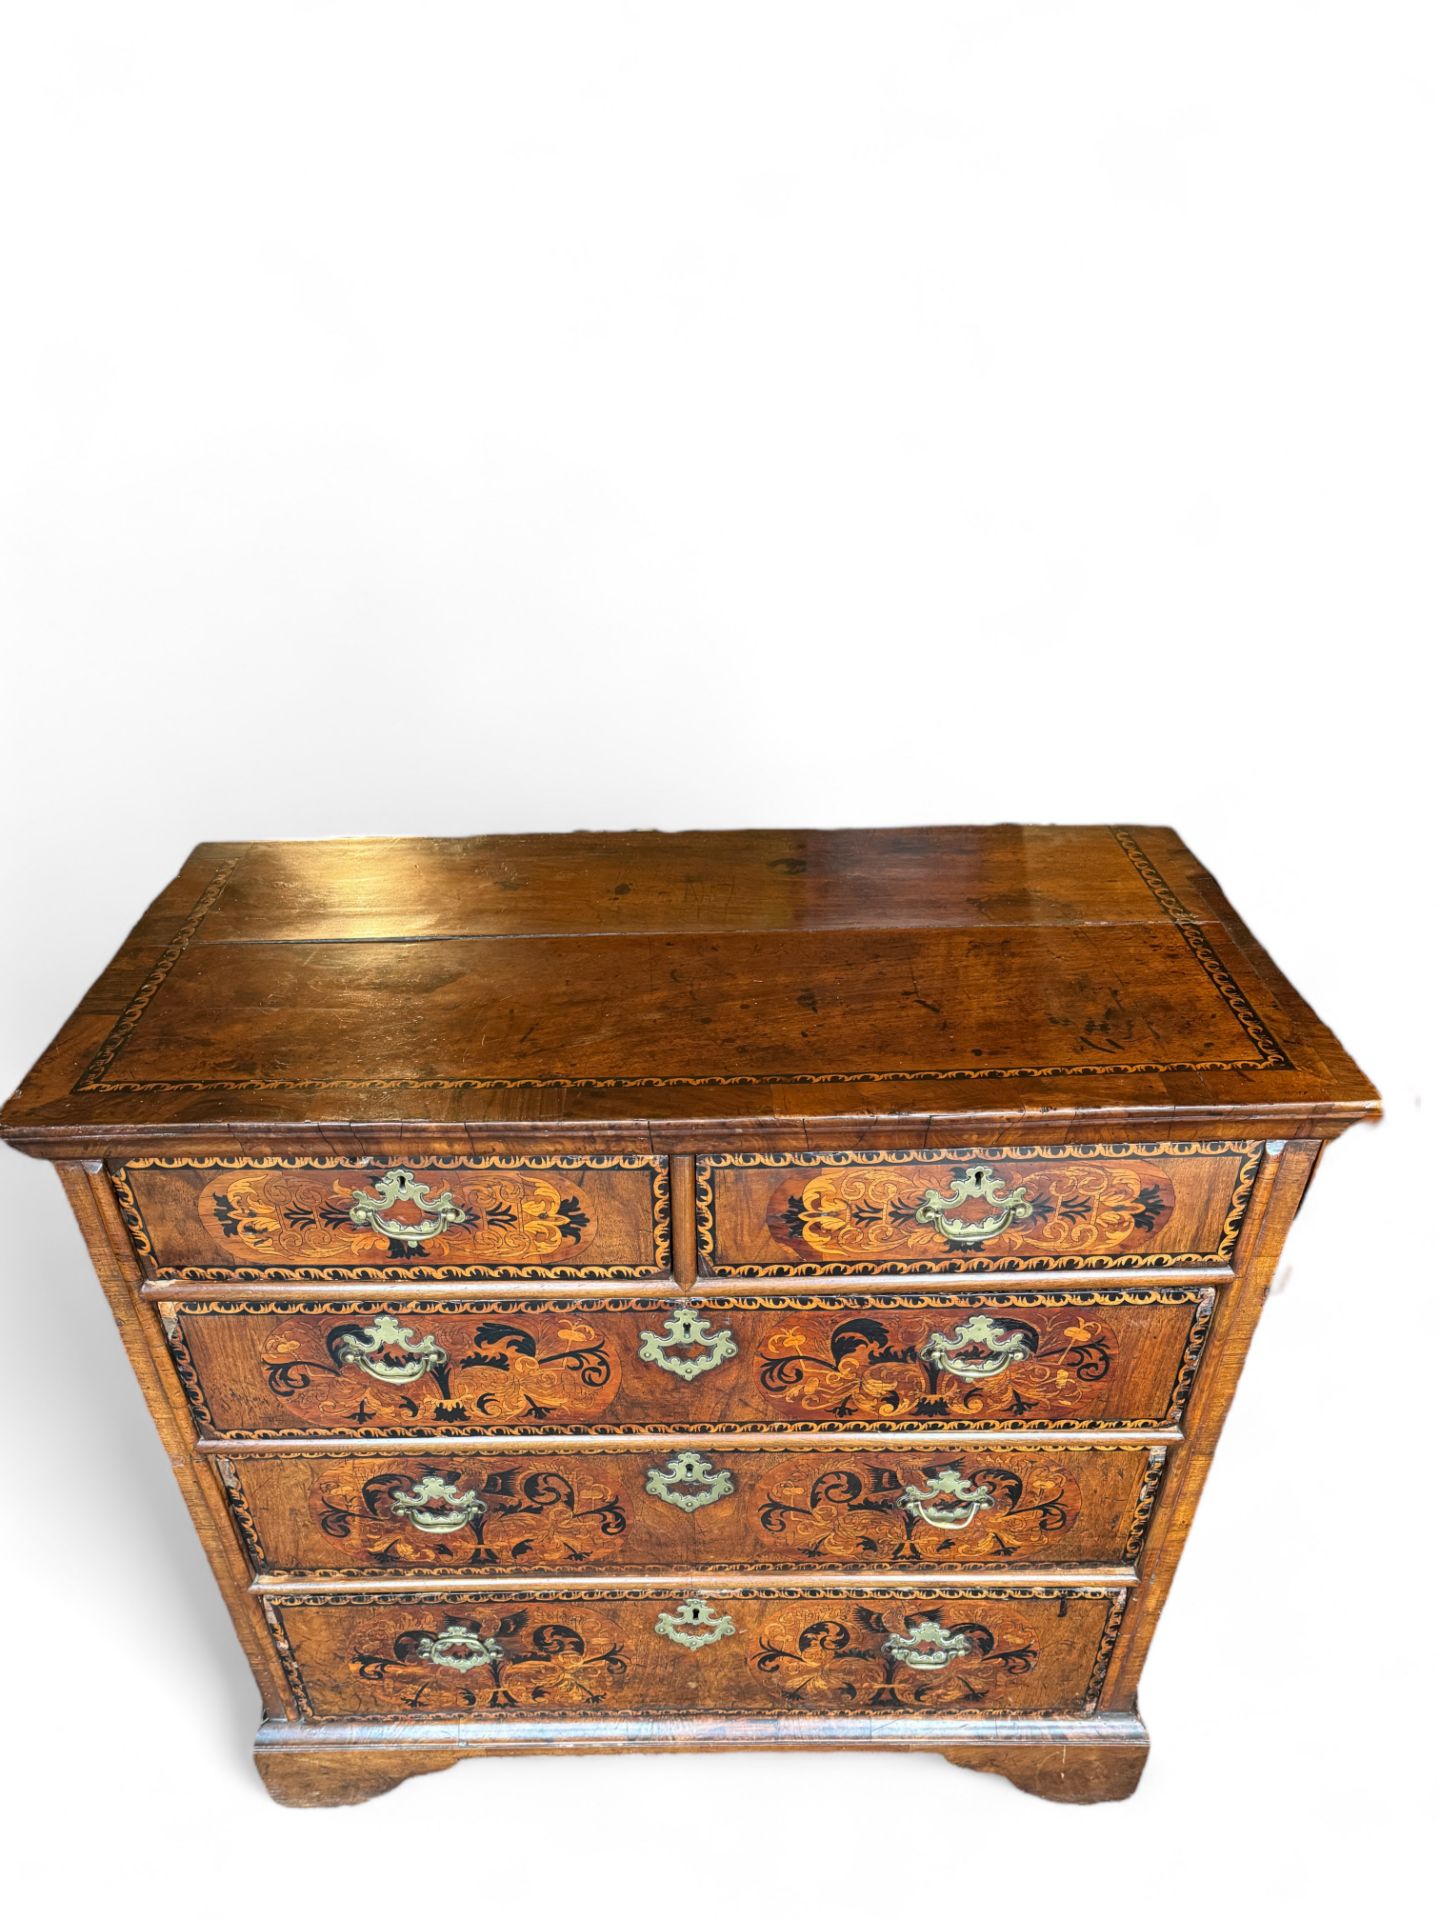 A William and Mary walnut, oak, sycamore and ebony marquetry chest - Image 6 of 6